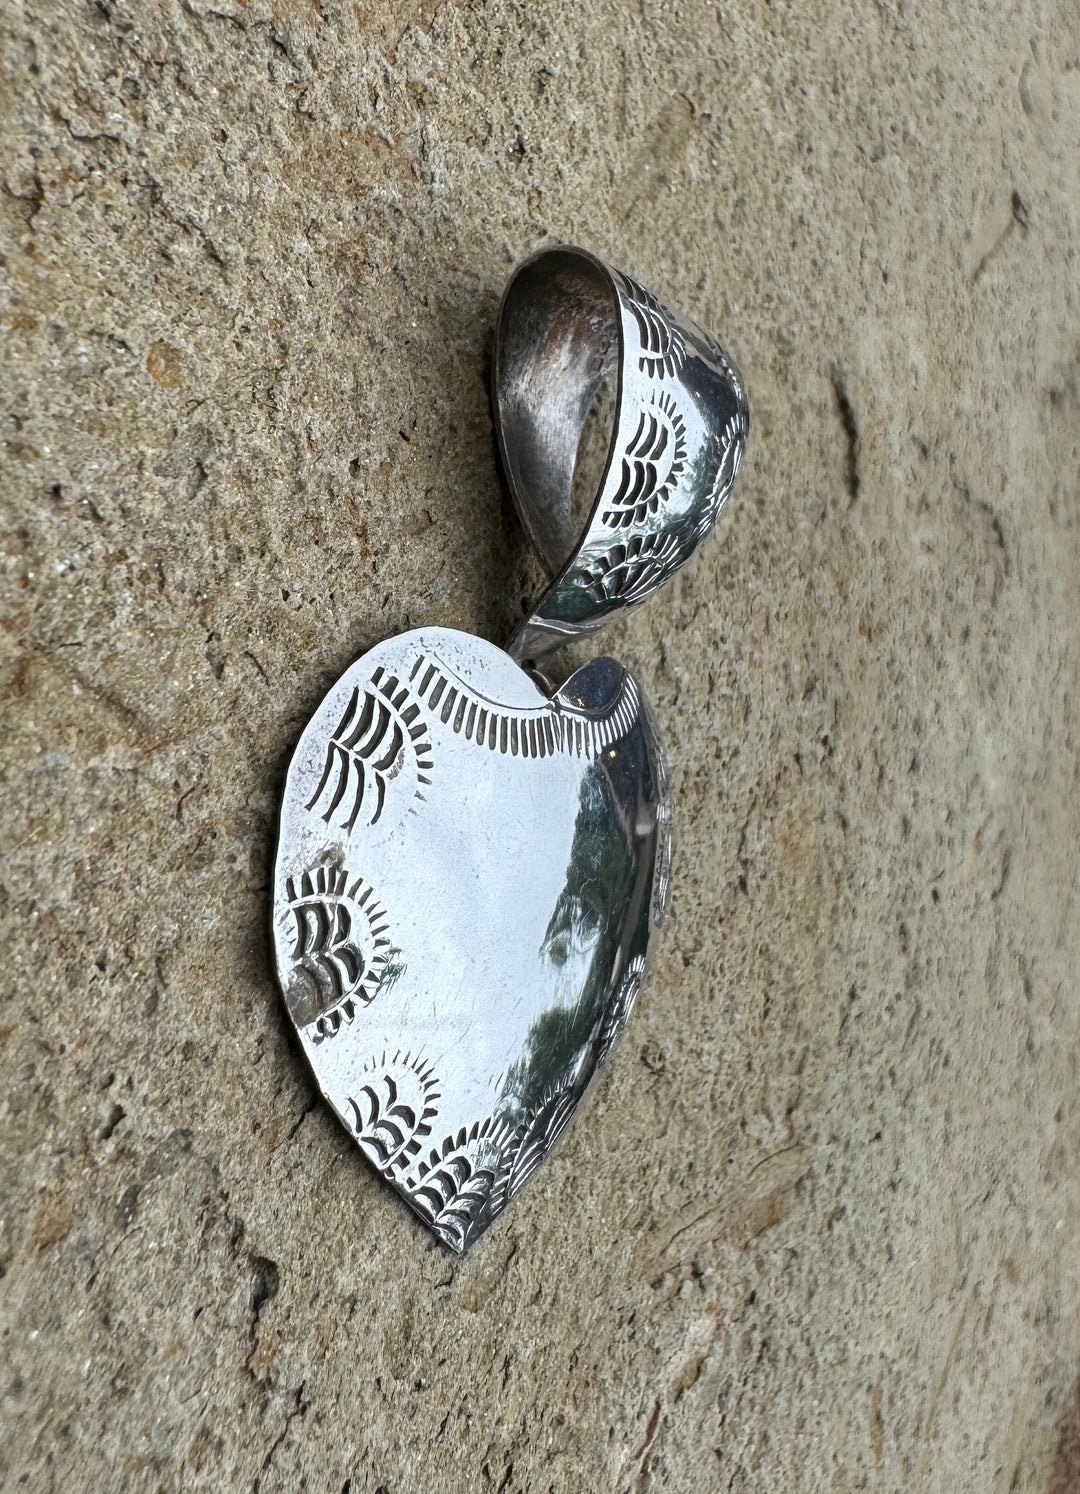 Oxidized Sterling Silver BIG Heart Pendant with Large Bail